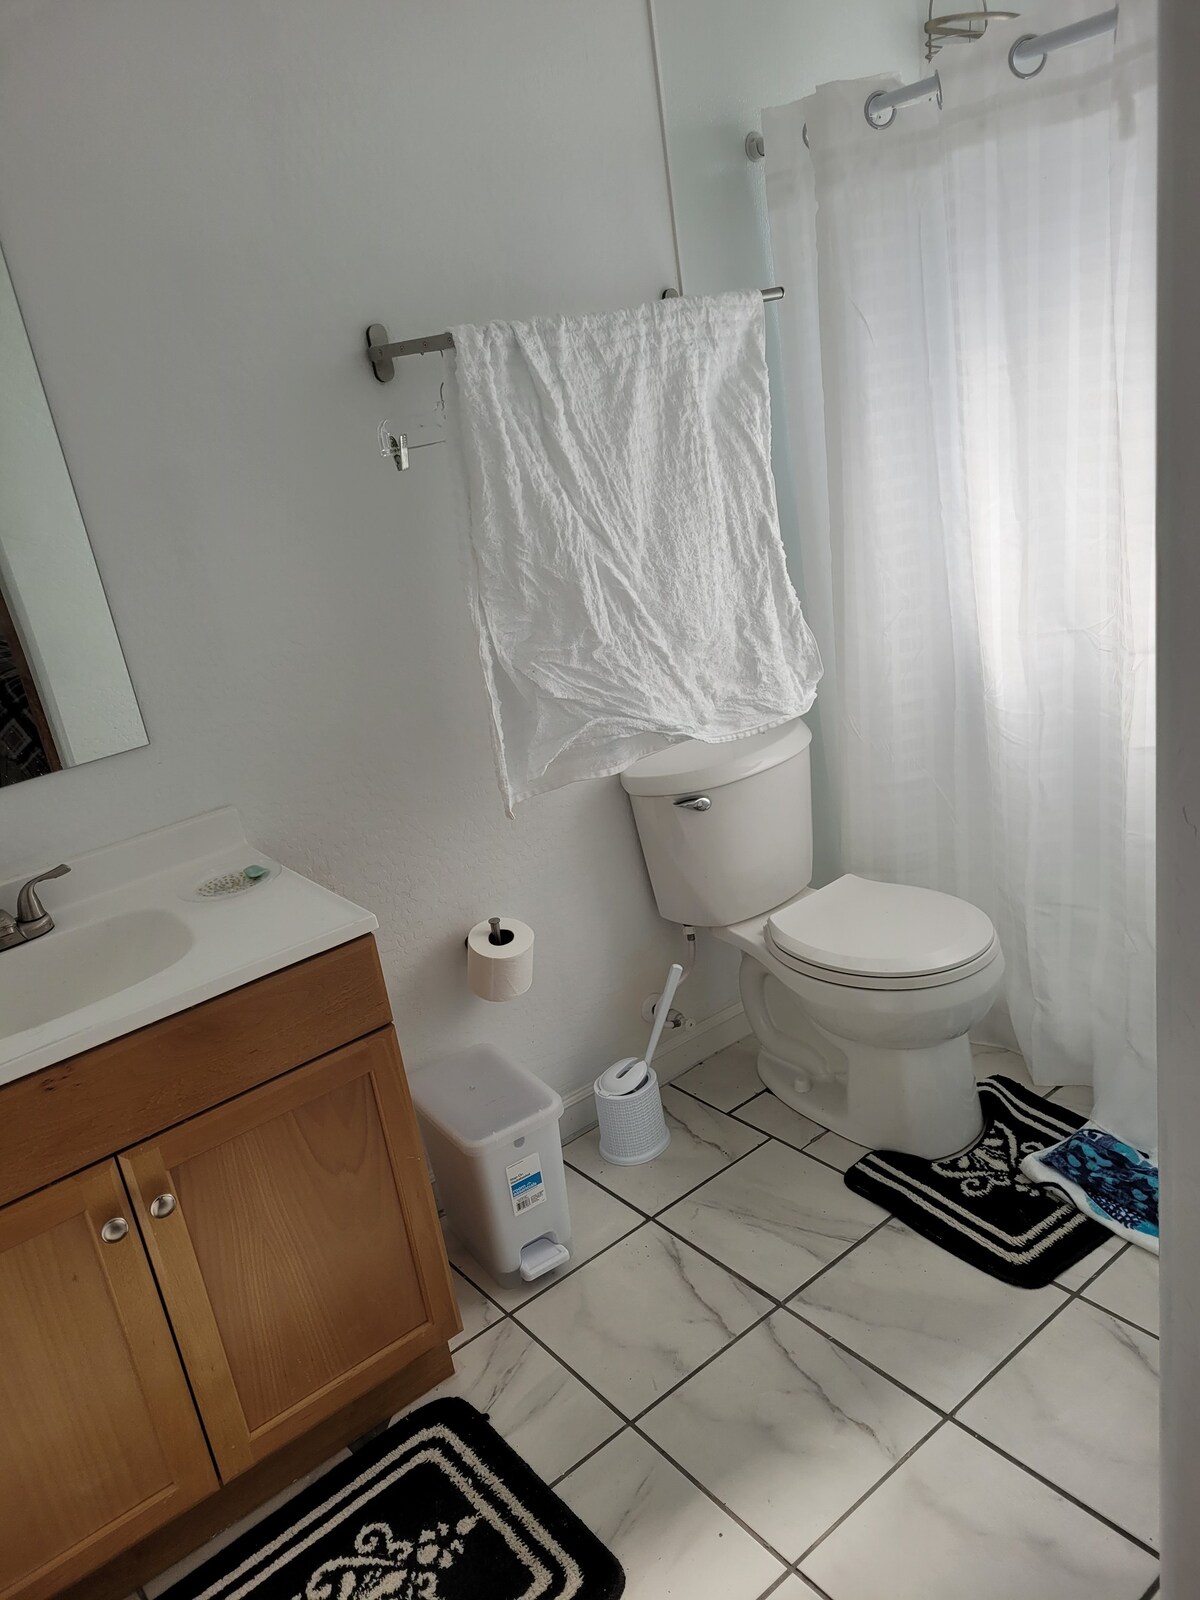 One bedroom (private shower) in a 3 bedroom home